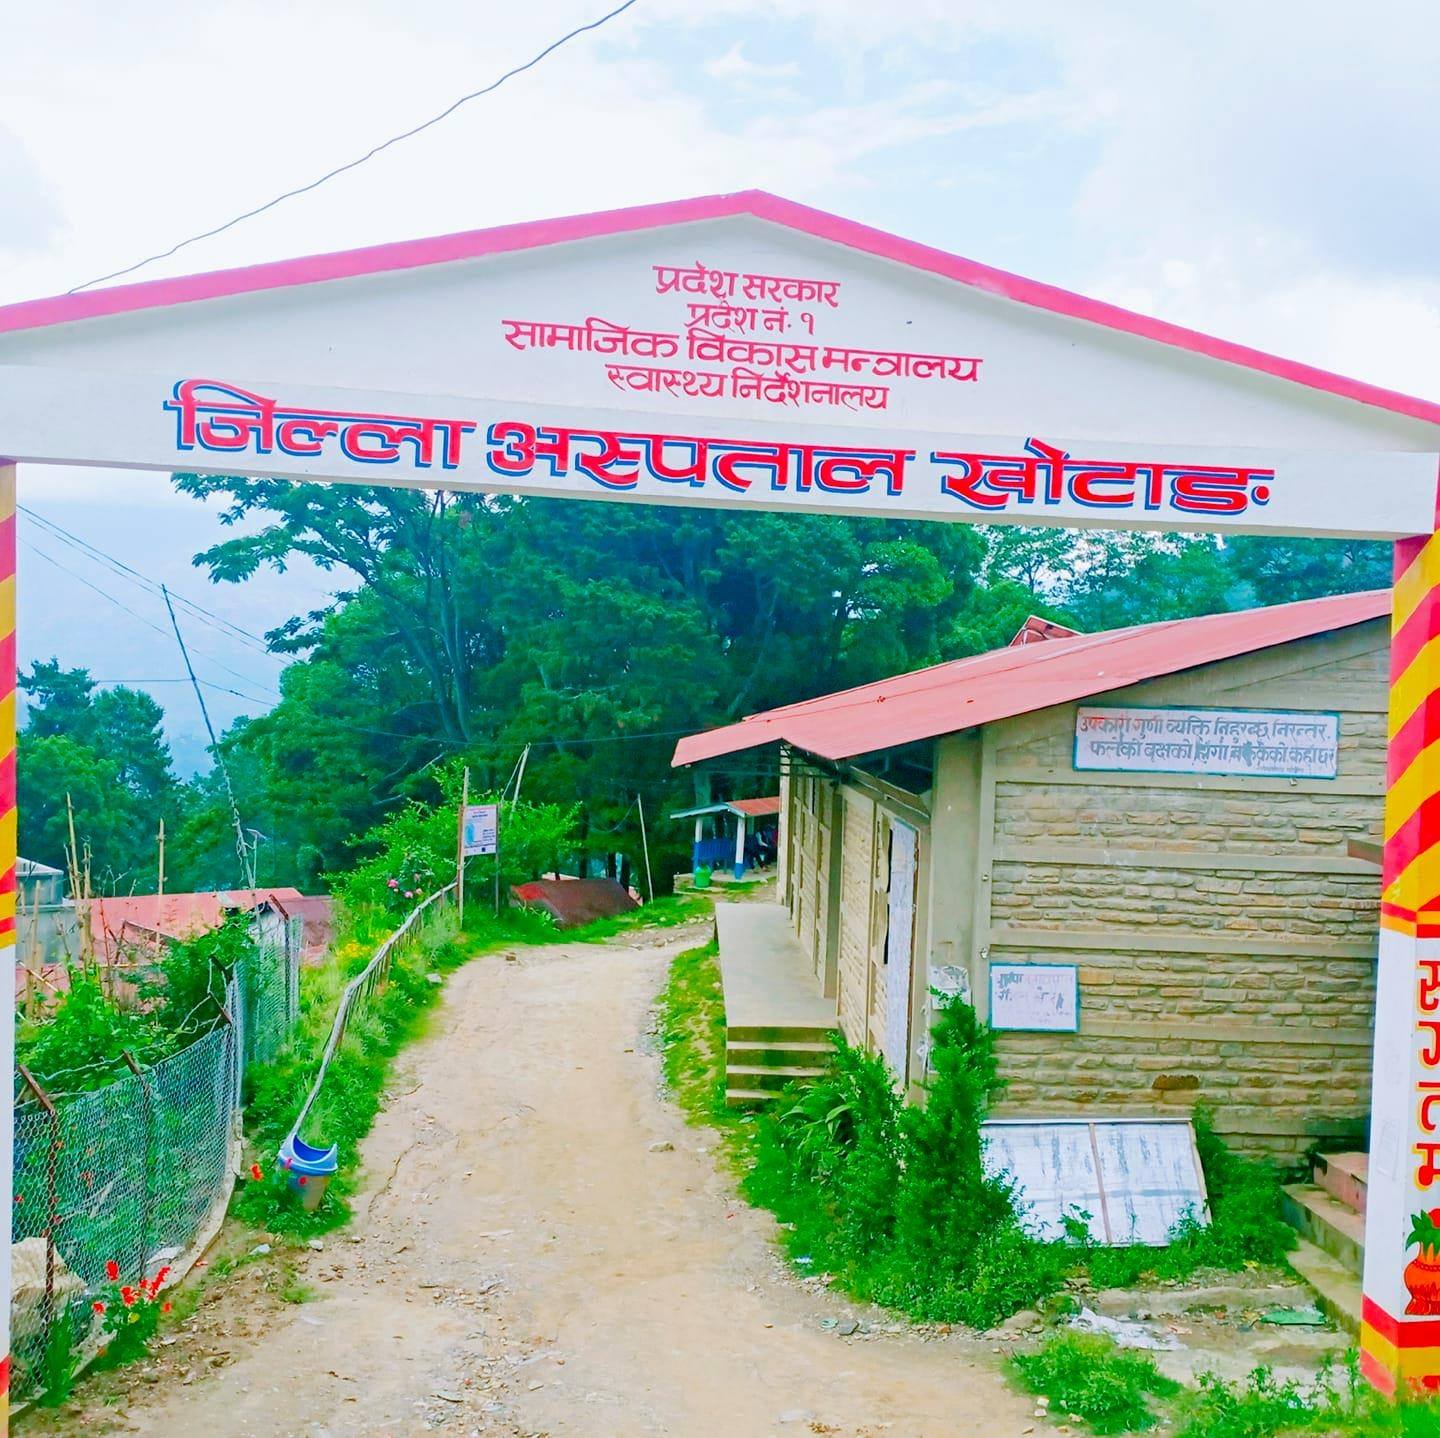 Cases of viral fever go up in Khotang, infected health workers compelled to render services